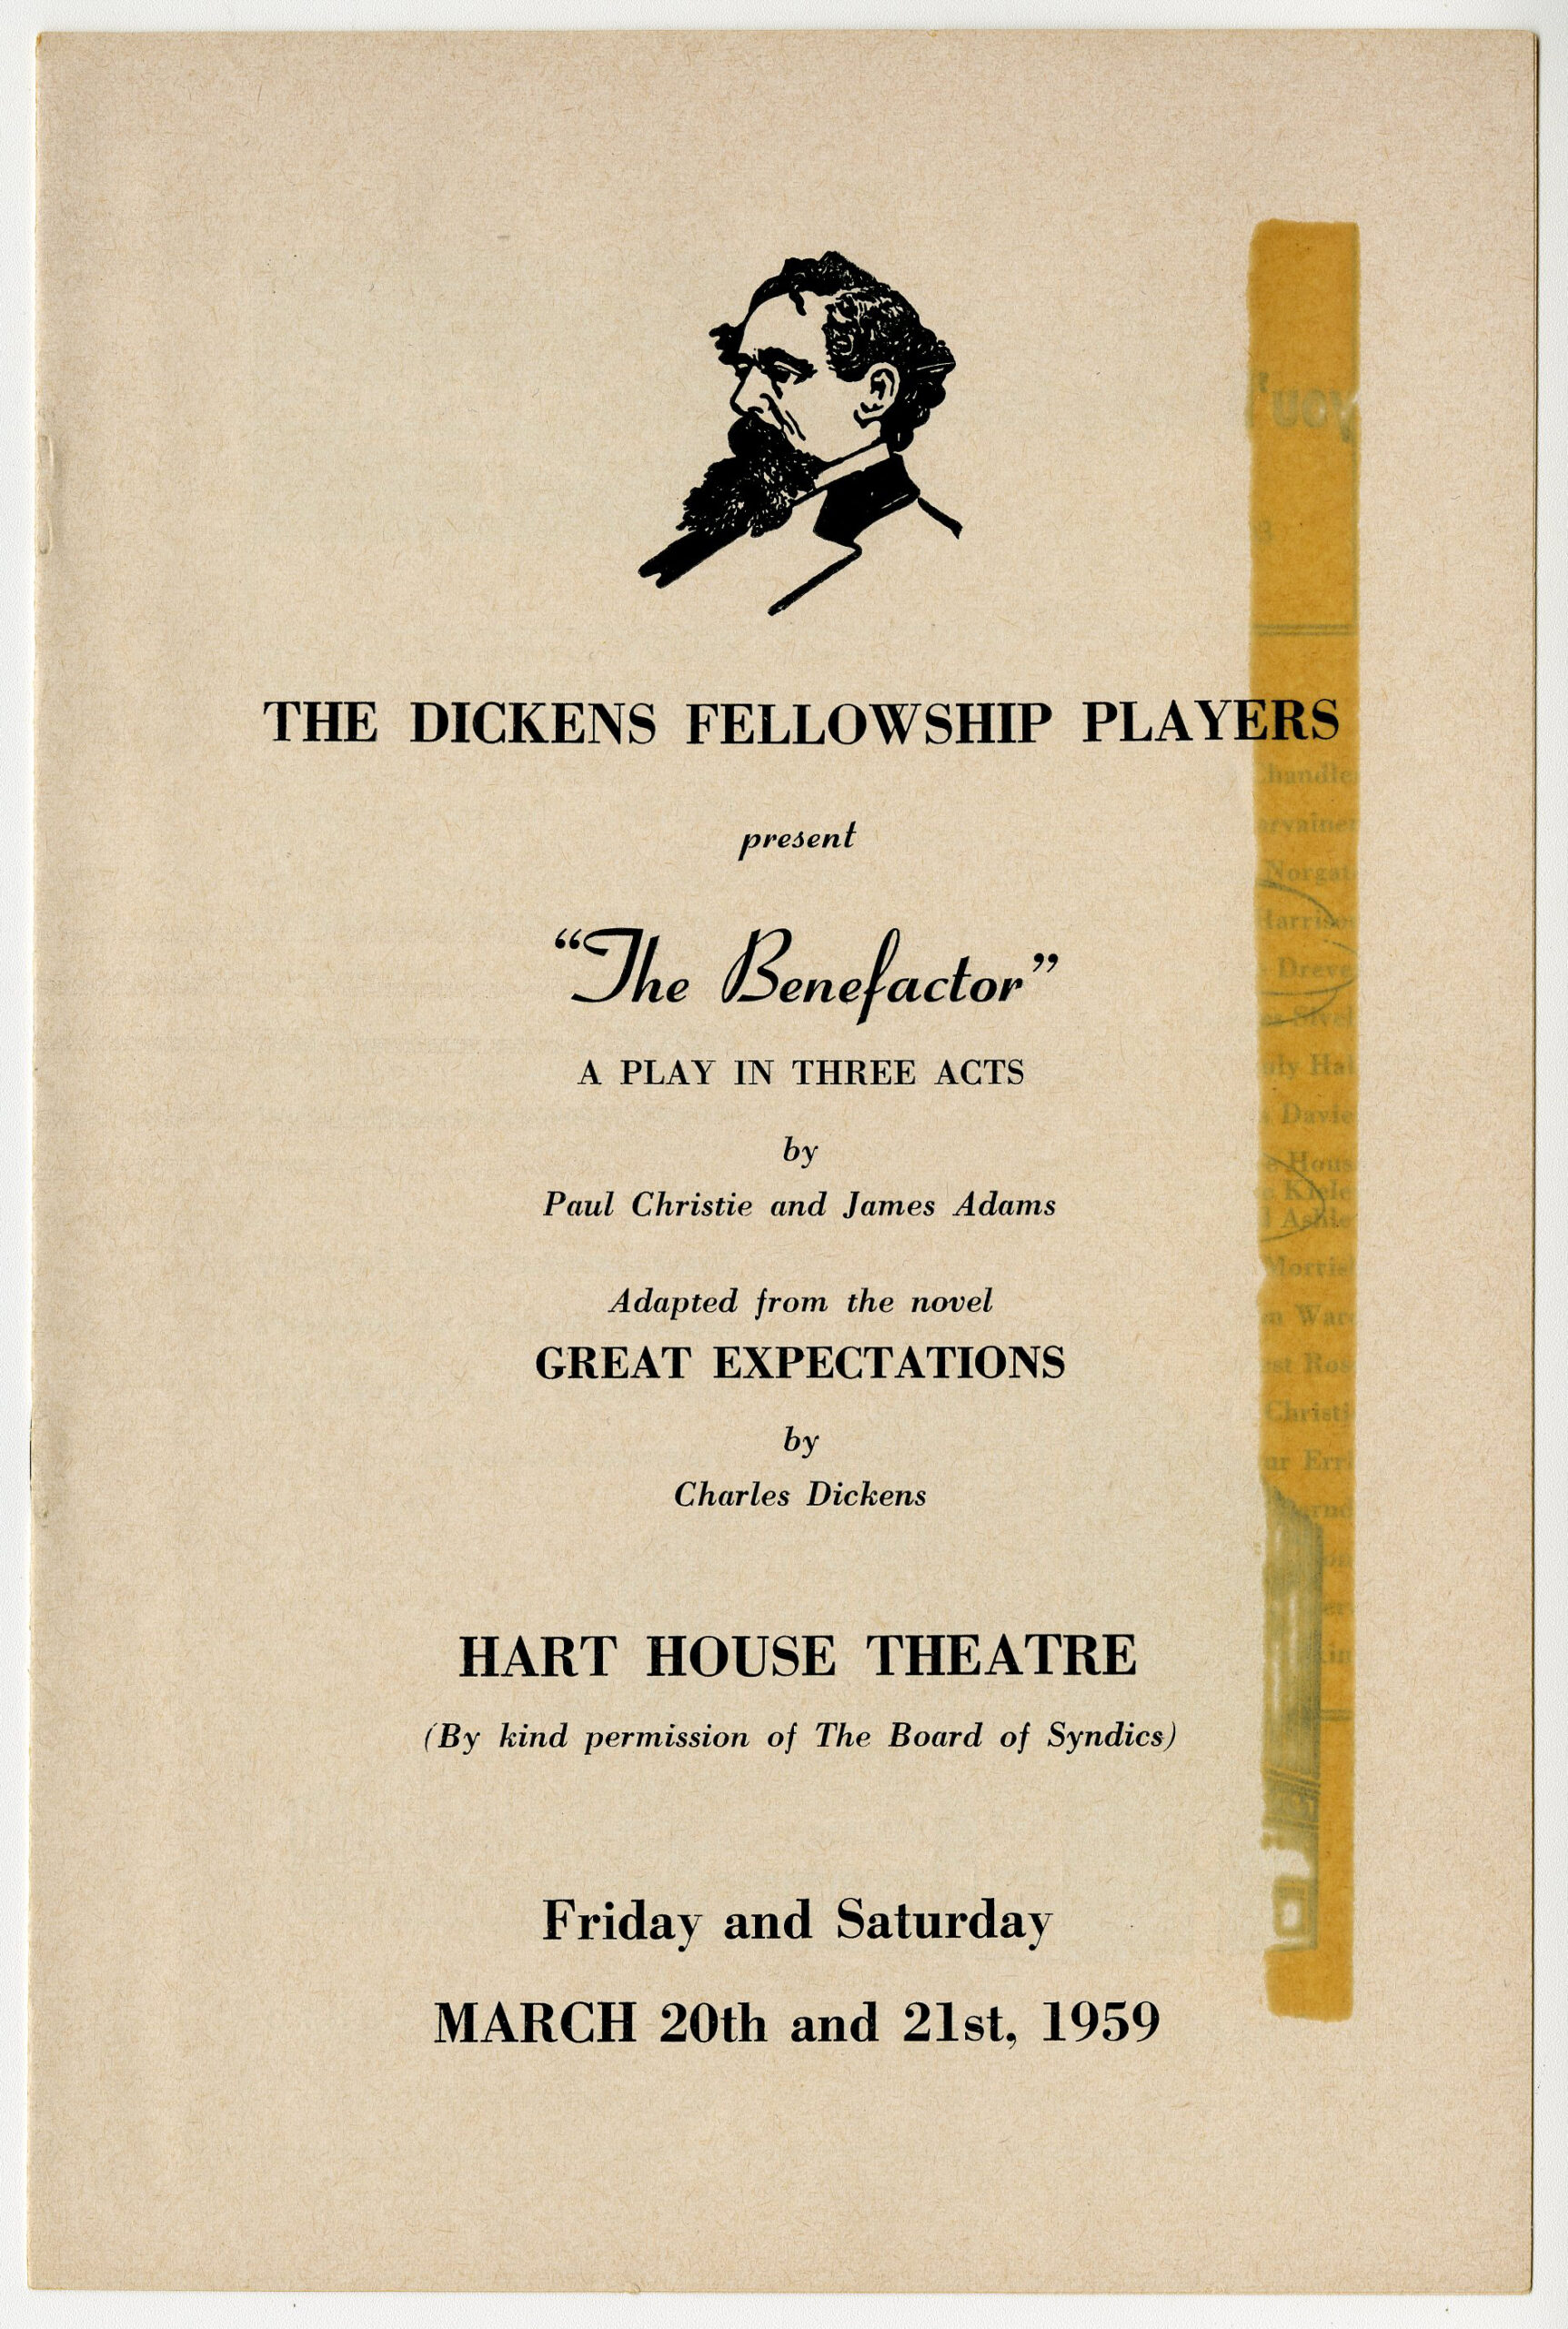 A white program for a play called 'The Benefactor' at the Dickens Fellowship Players, featuring information about the production.